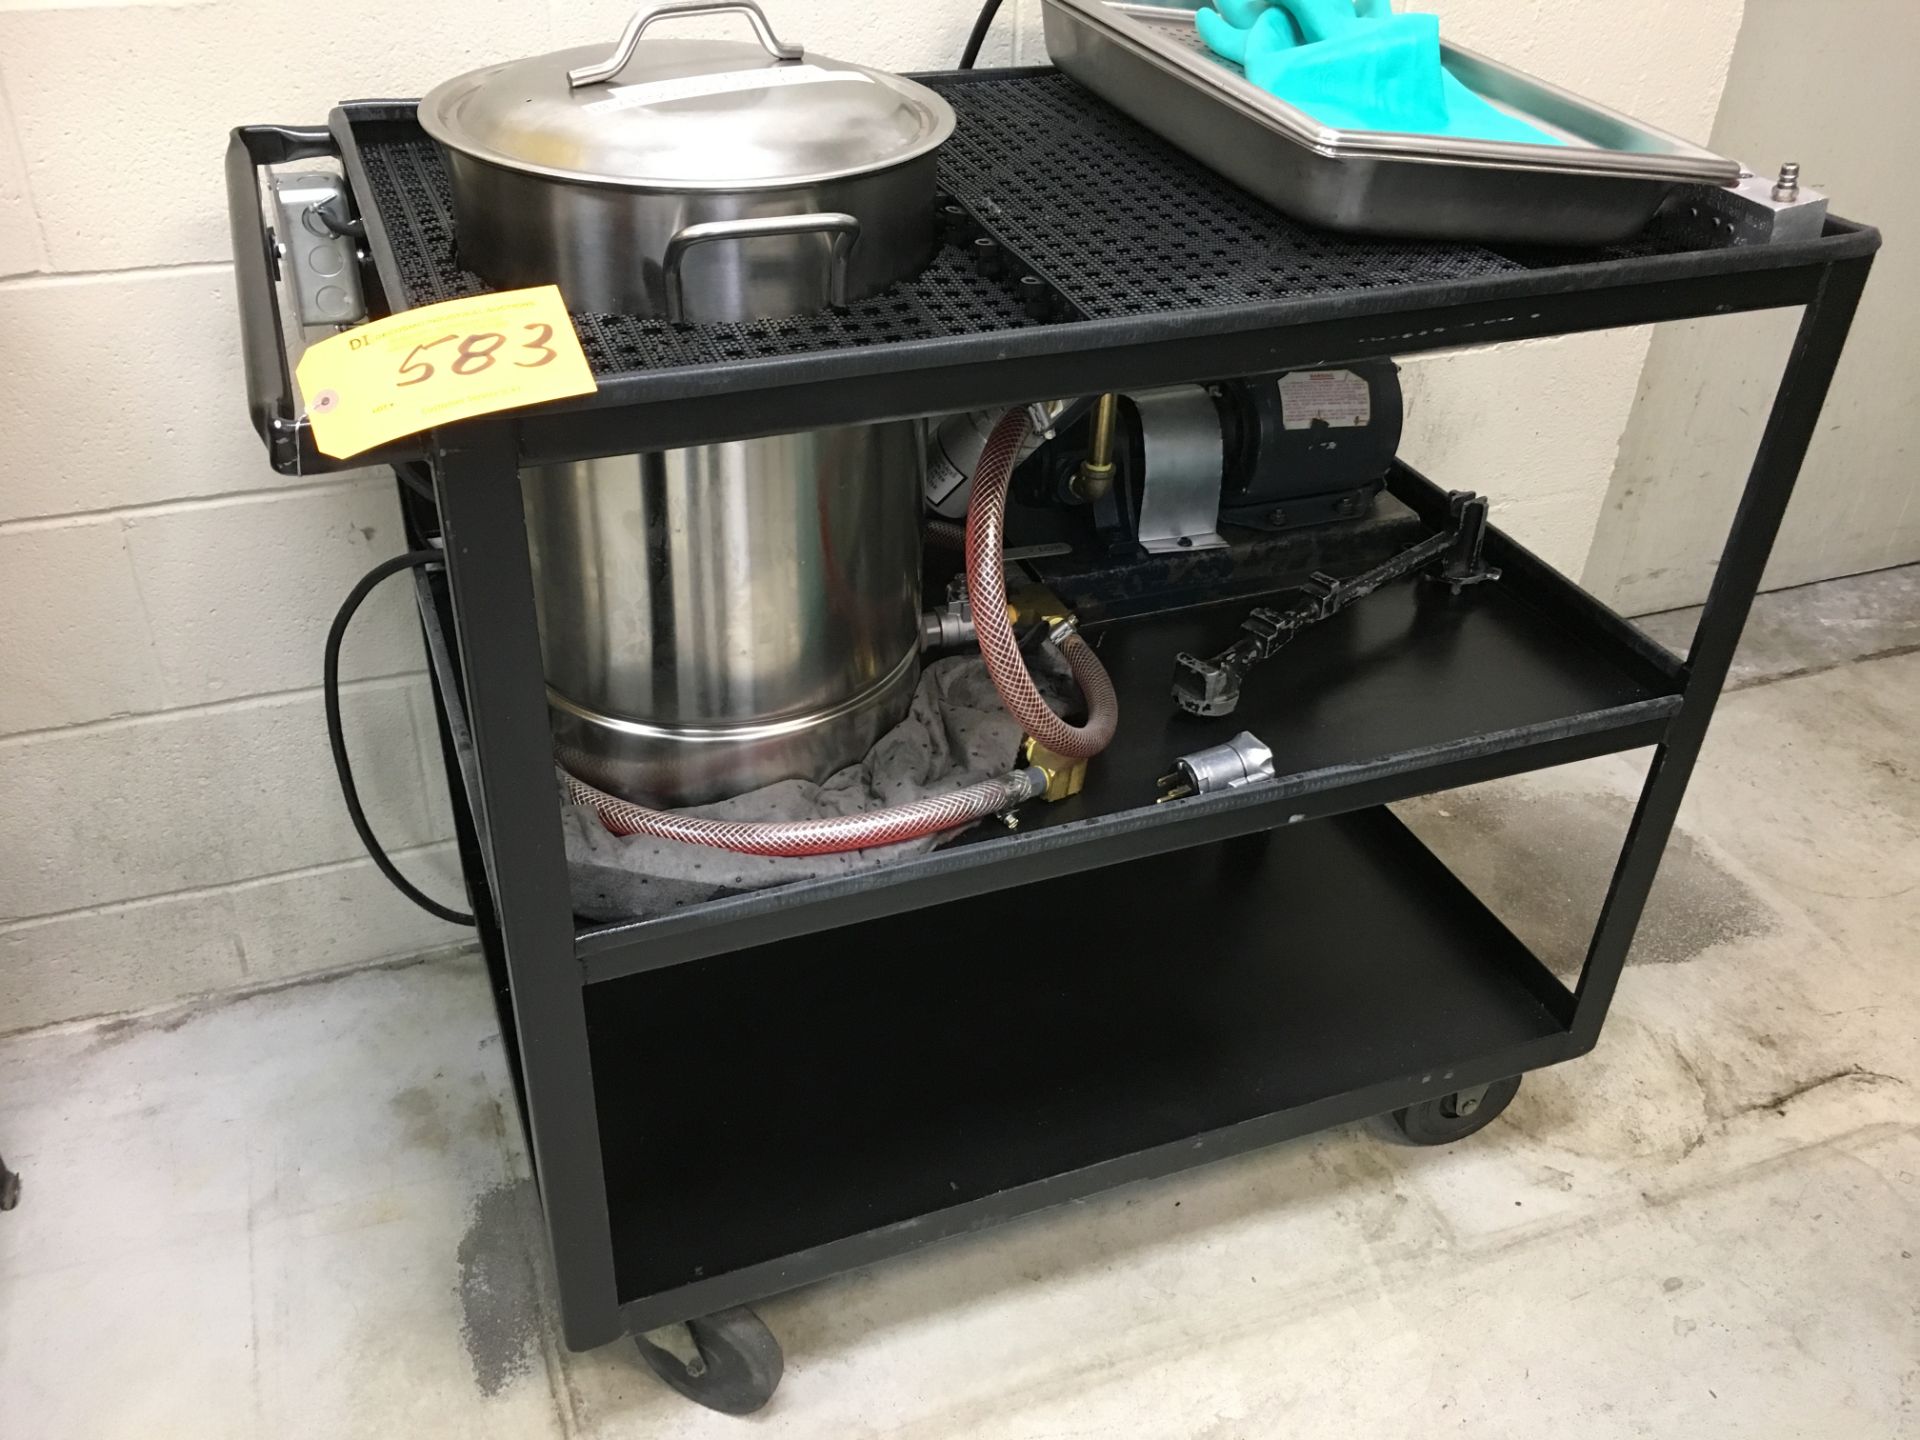 PORTABLE STAINLESS STEEL BACKFLUSH TEST STAND WITH PUMP